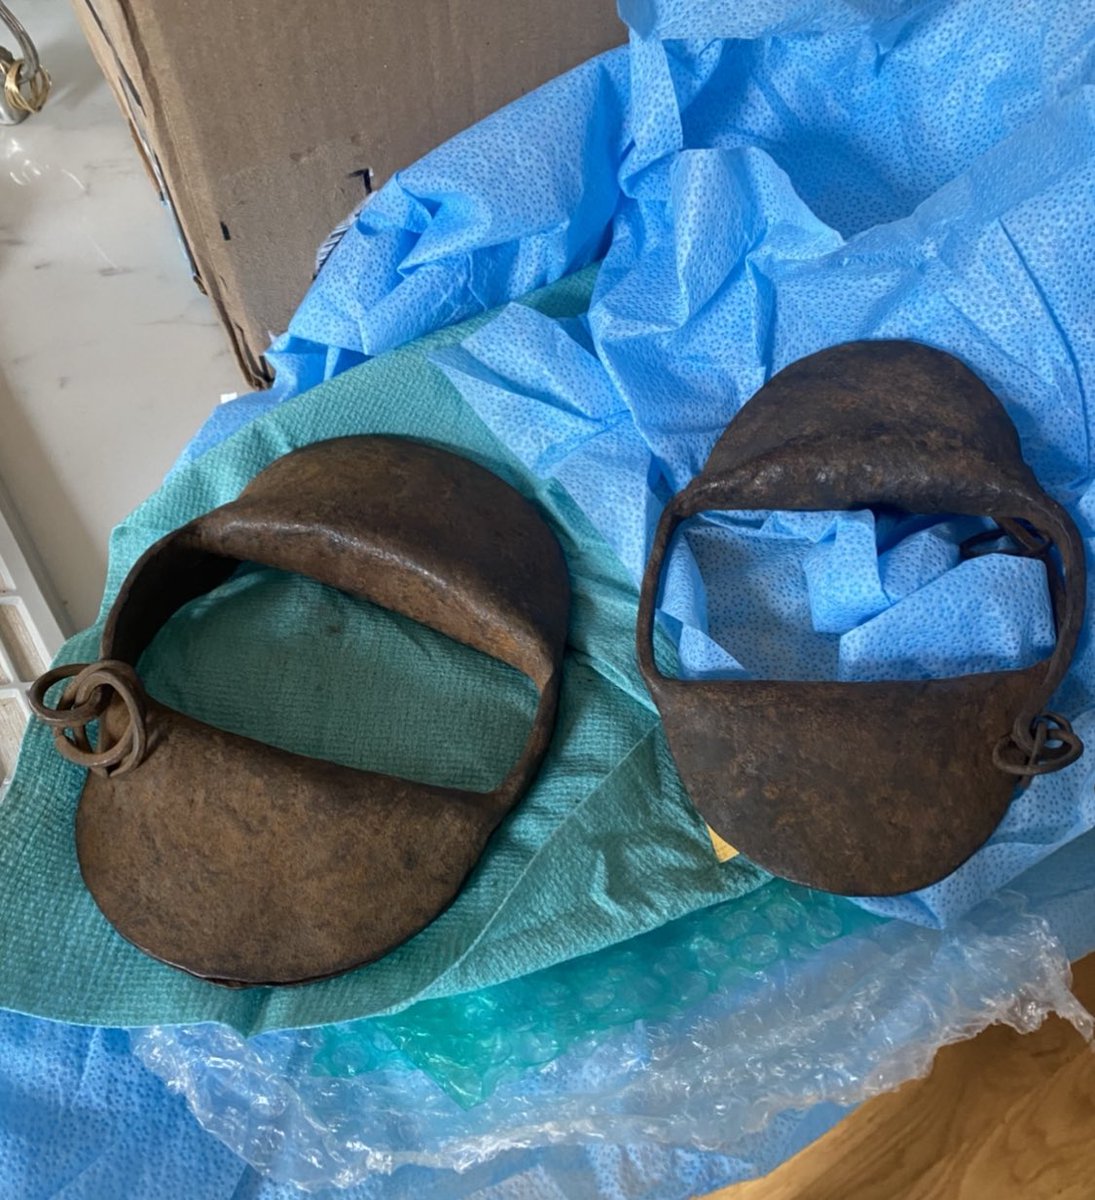 These are a pair of child shackles that just arrived last week for my personal collection. Holding them in my hands for the first time made me cry. American chattel slavery is not for Twitter jokes, even to own Trumpists. Please.